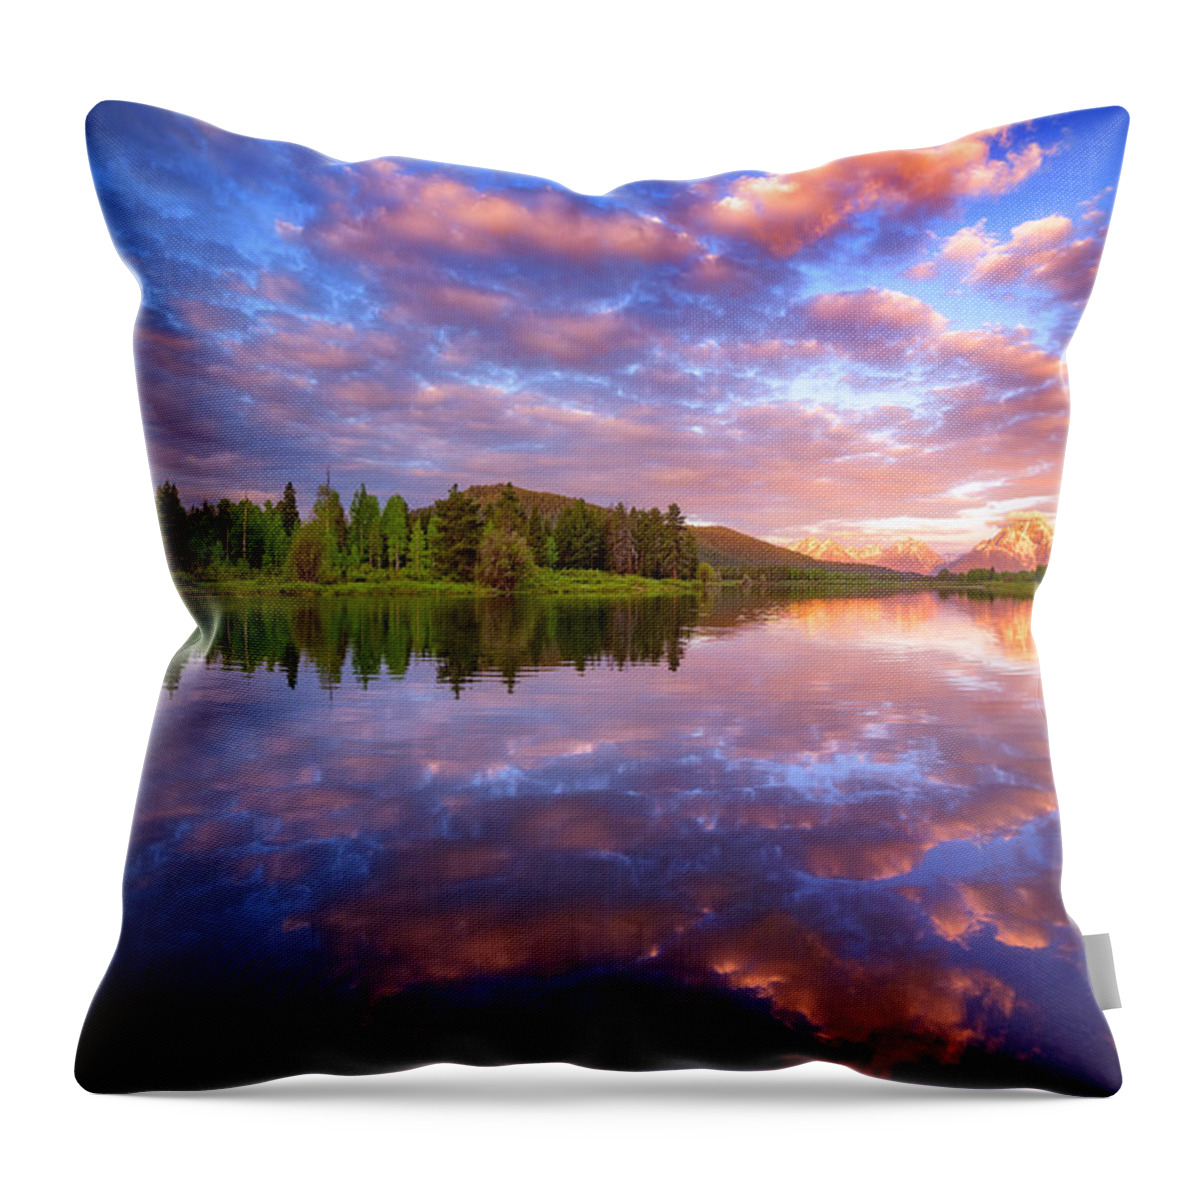 Clouds Throw Pillow featuring the photograph Sunrise Kiss by Darren White